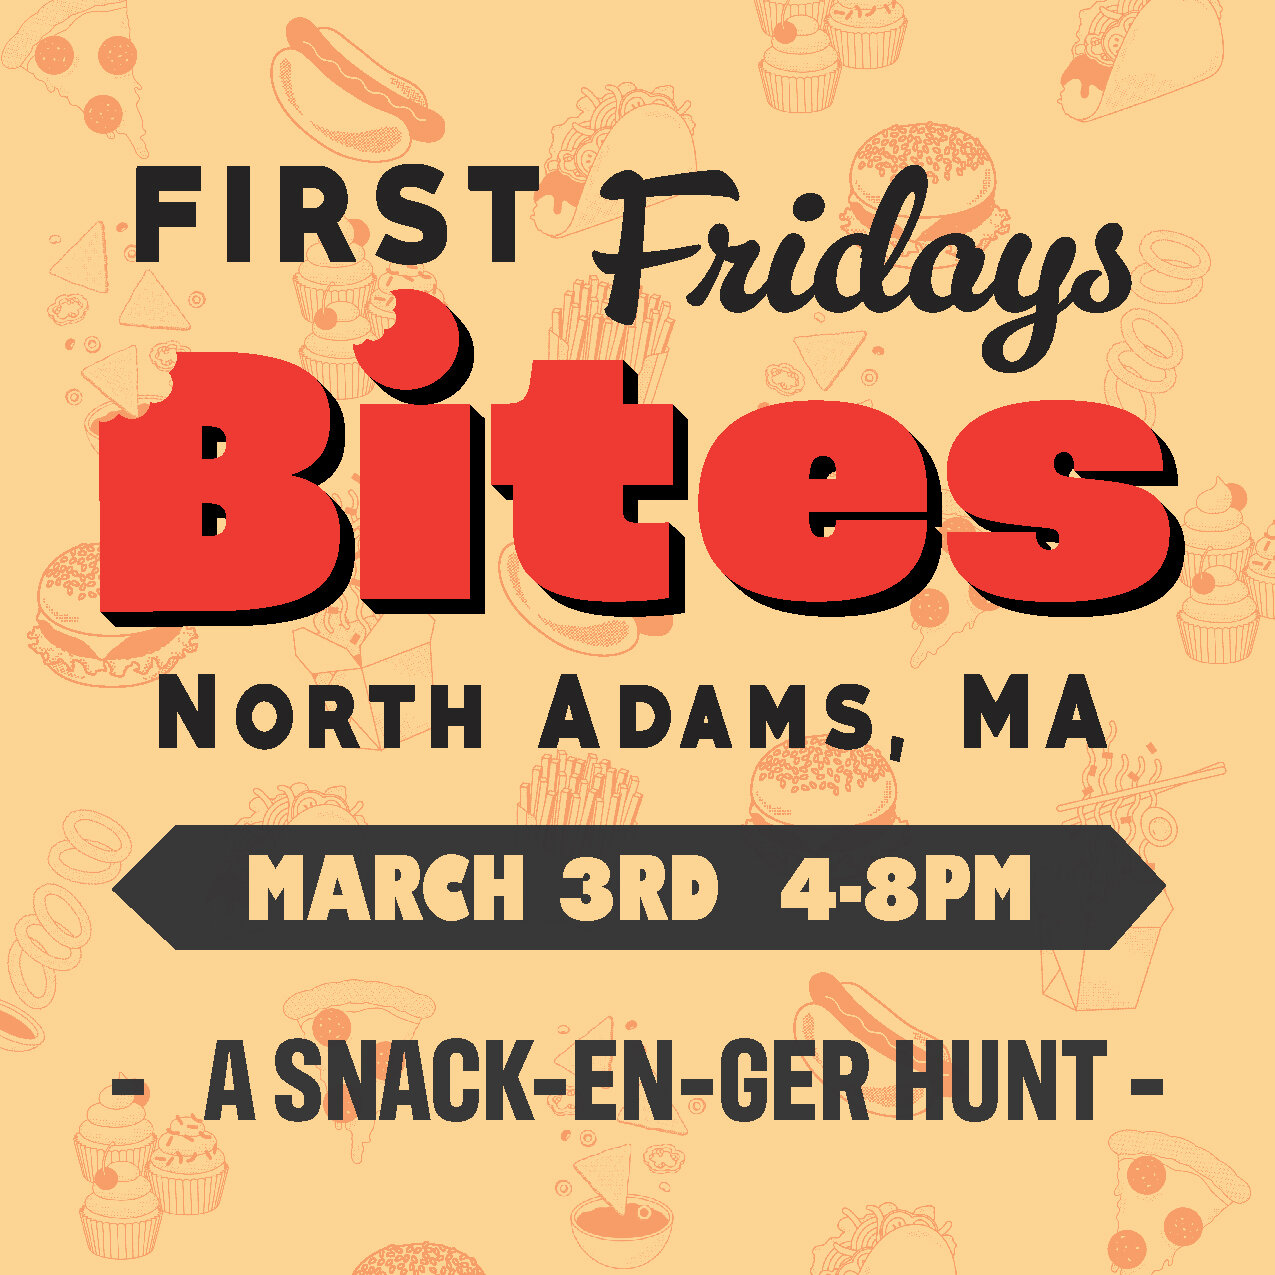 Come hungry! Wear a FIRST Bites button to participating restaurants during the March FIRST Fridays event to taste of what everyone has to offer. 
Start the evening at Gallery 51 on March 3 to pick up your button and the bites will follow. Visit nacha